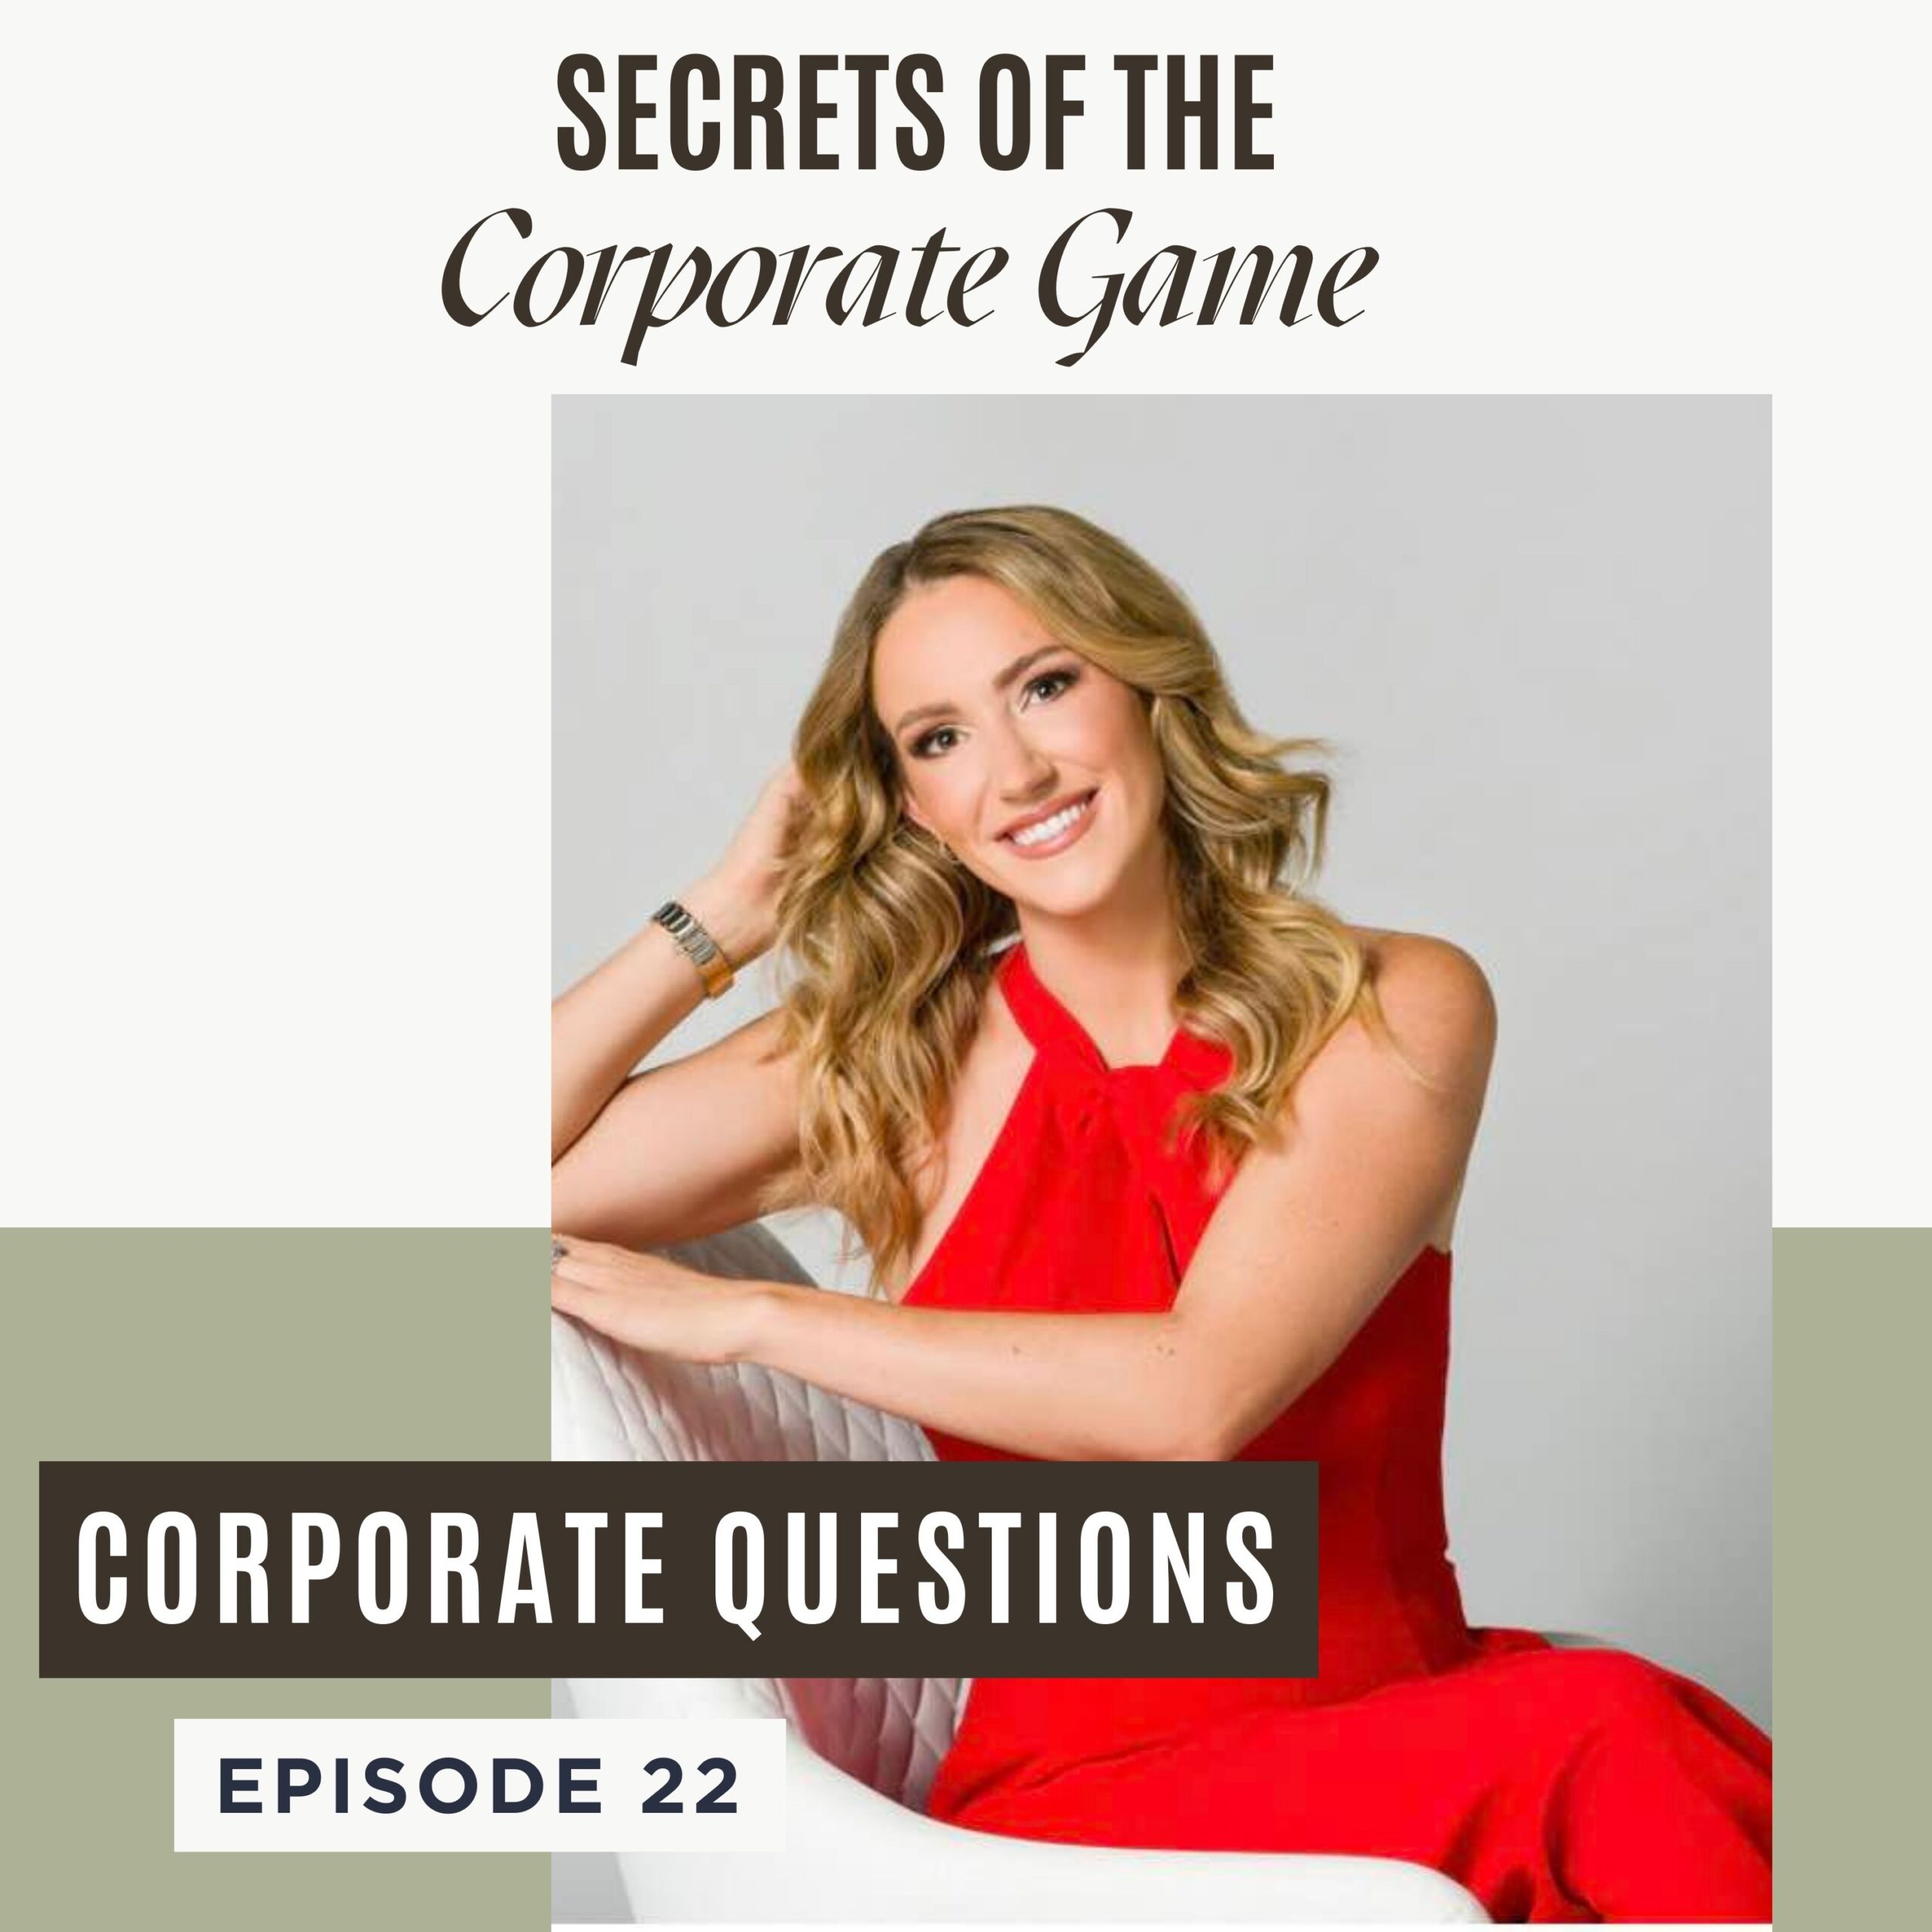 How to play the corporate game